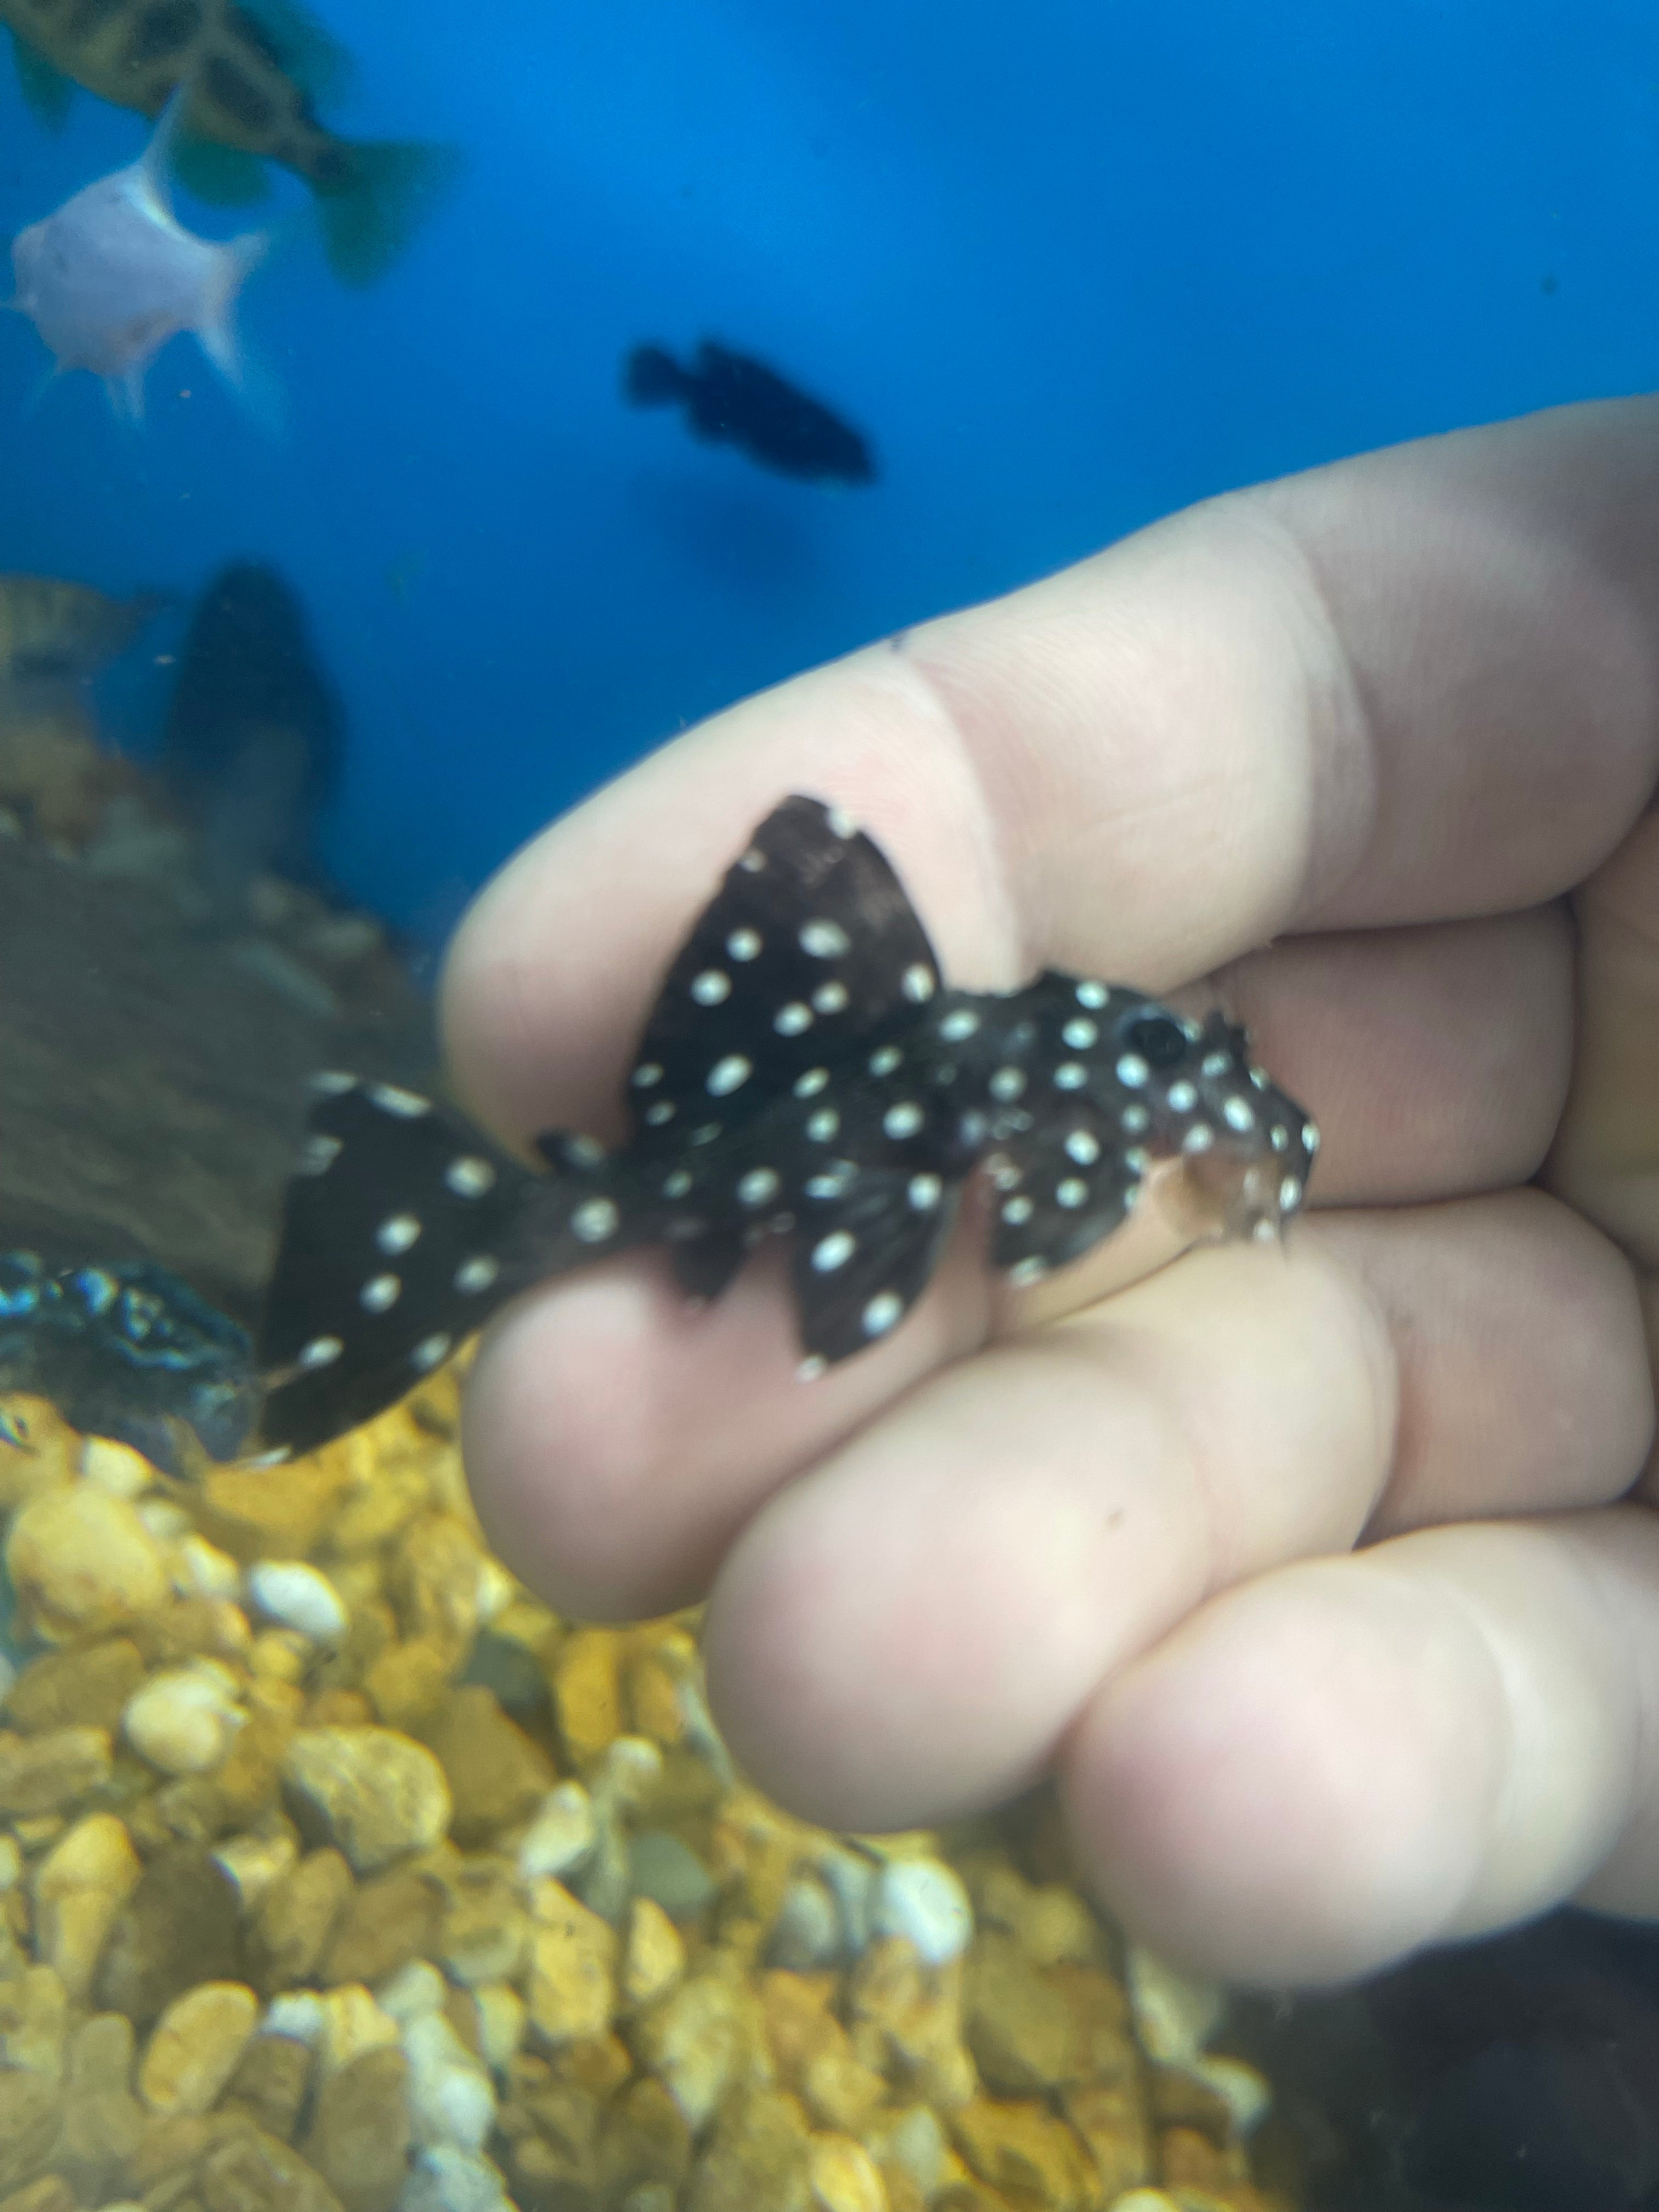 L007 / L240 Toothnose Galaxy Pleco (Leporacanthicus galaxias)